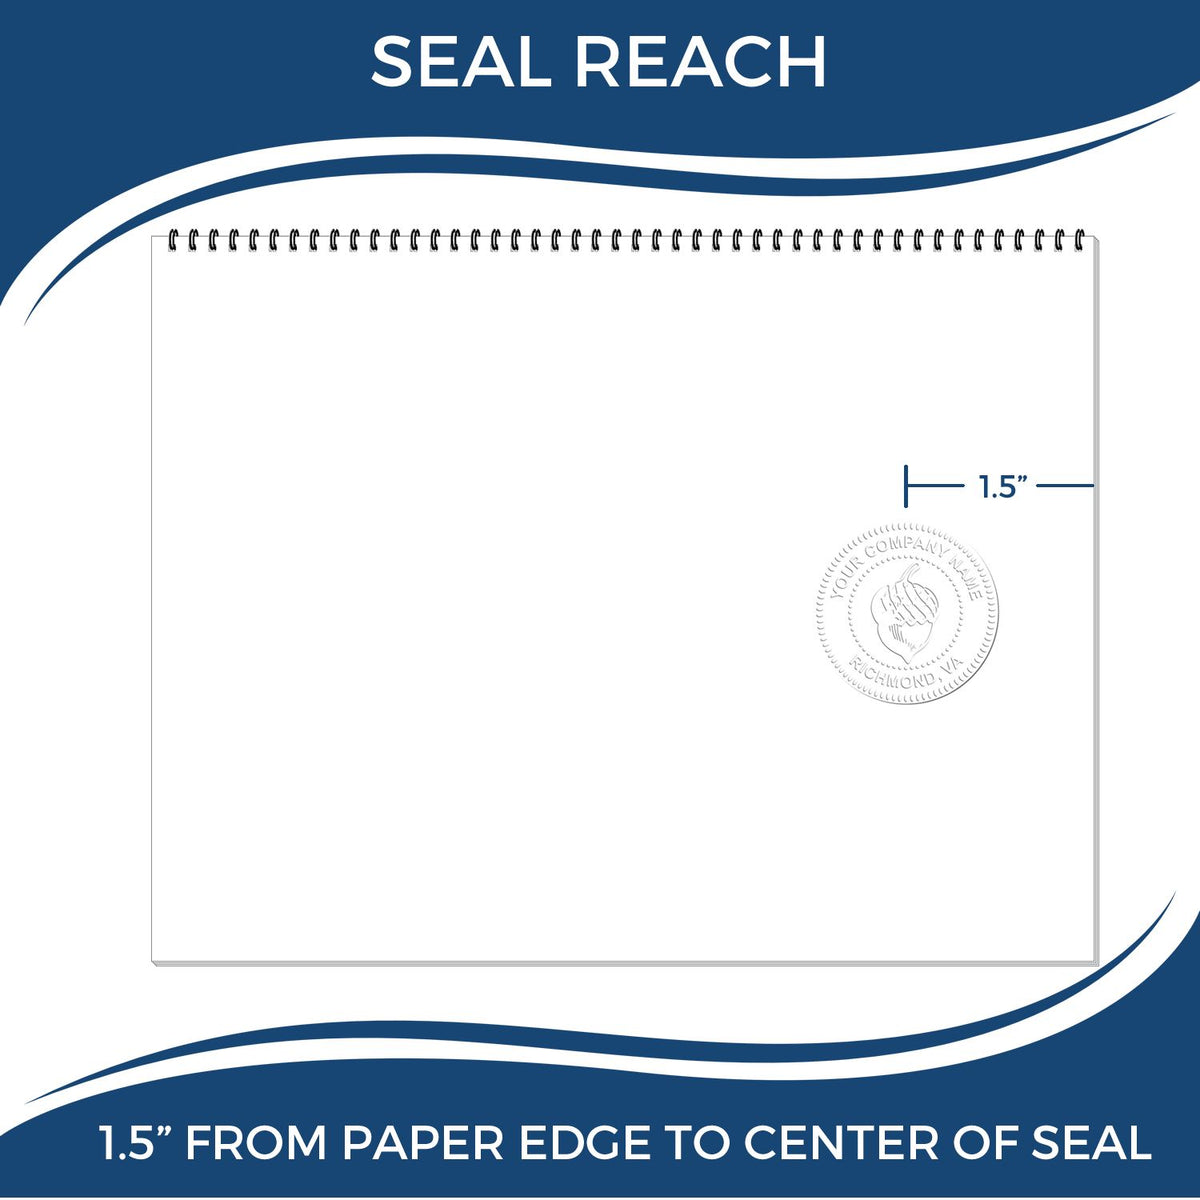 An infographic showing the seal reach which is represented by a ruler and a miniature seal image of the Hybrid Wyoming Geologist Seal